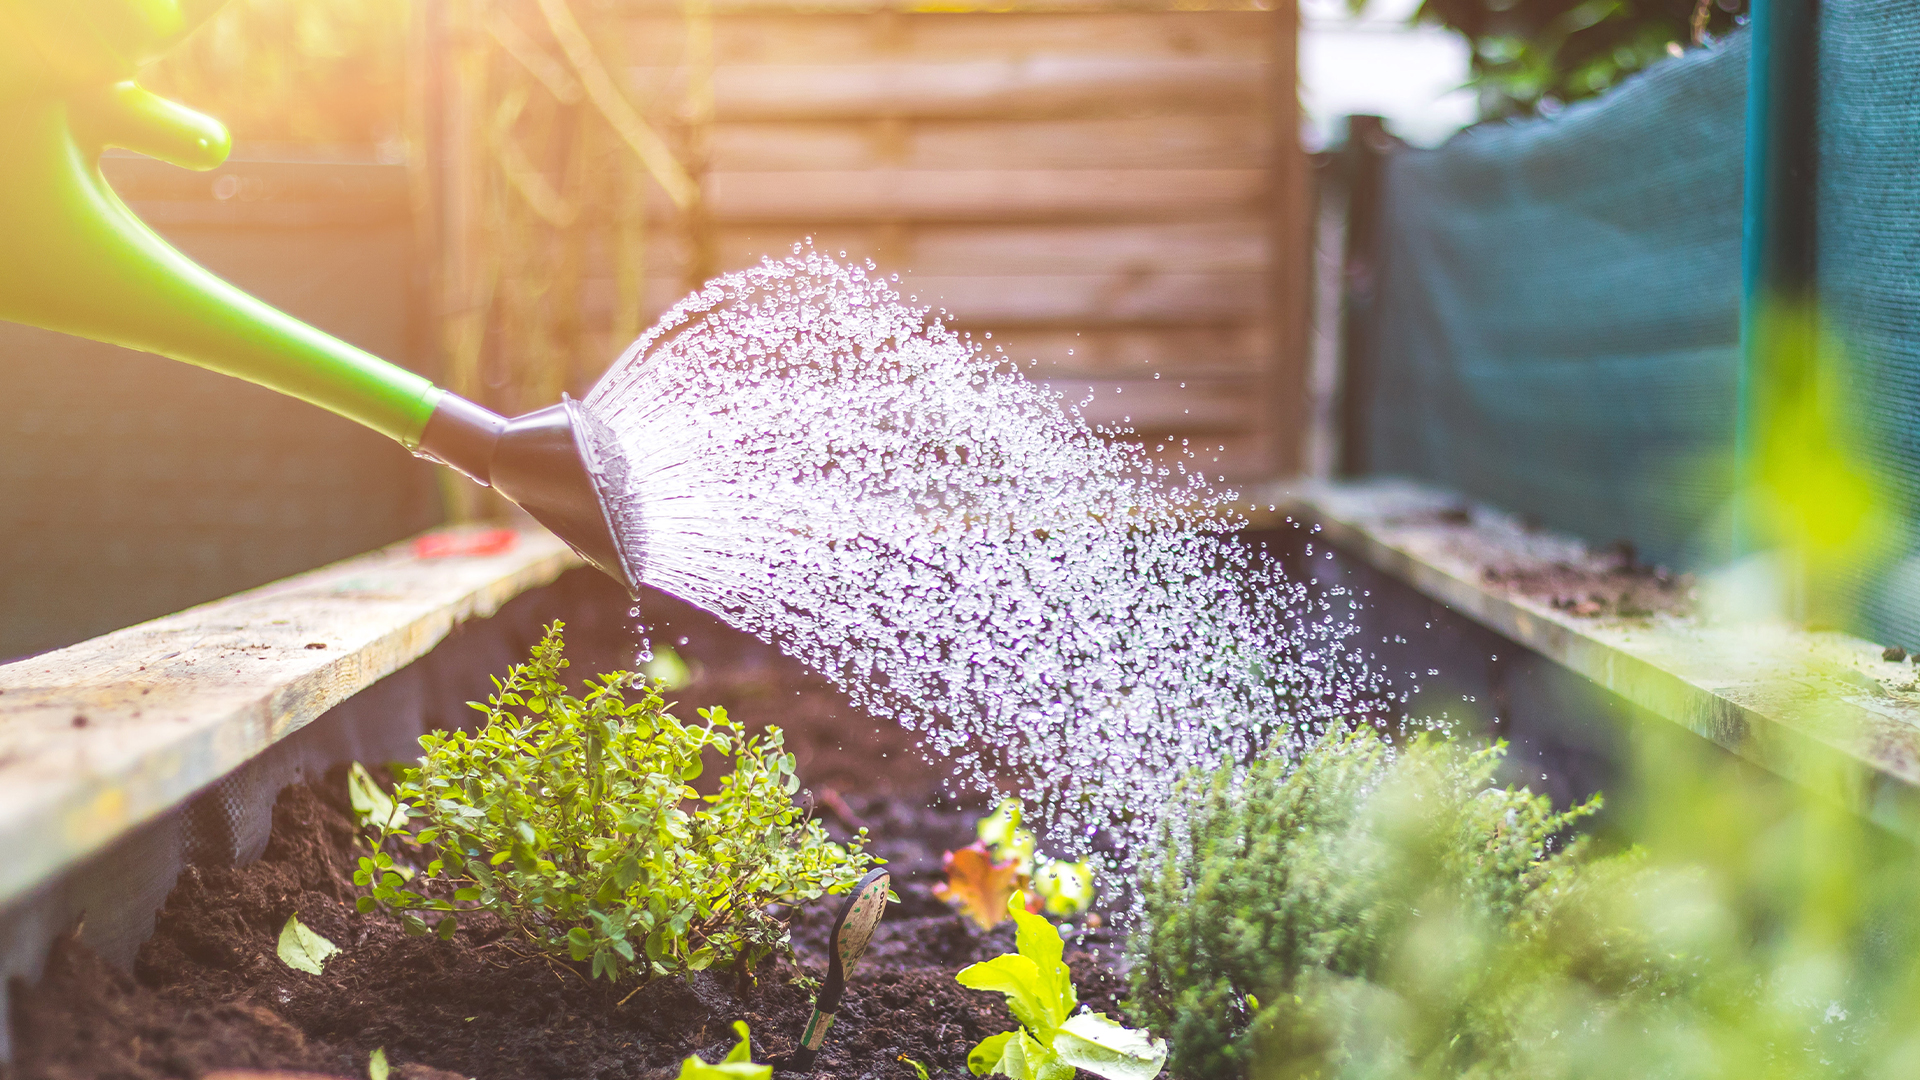 I'm a gardening expert & here's a cheap item to water plants when you're away